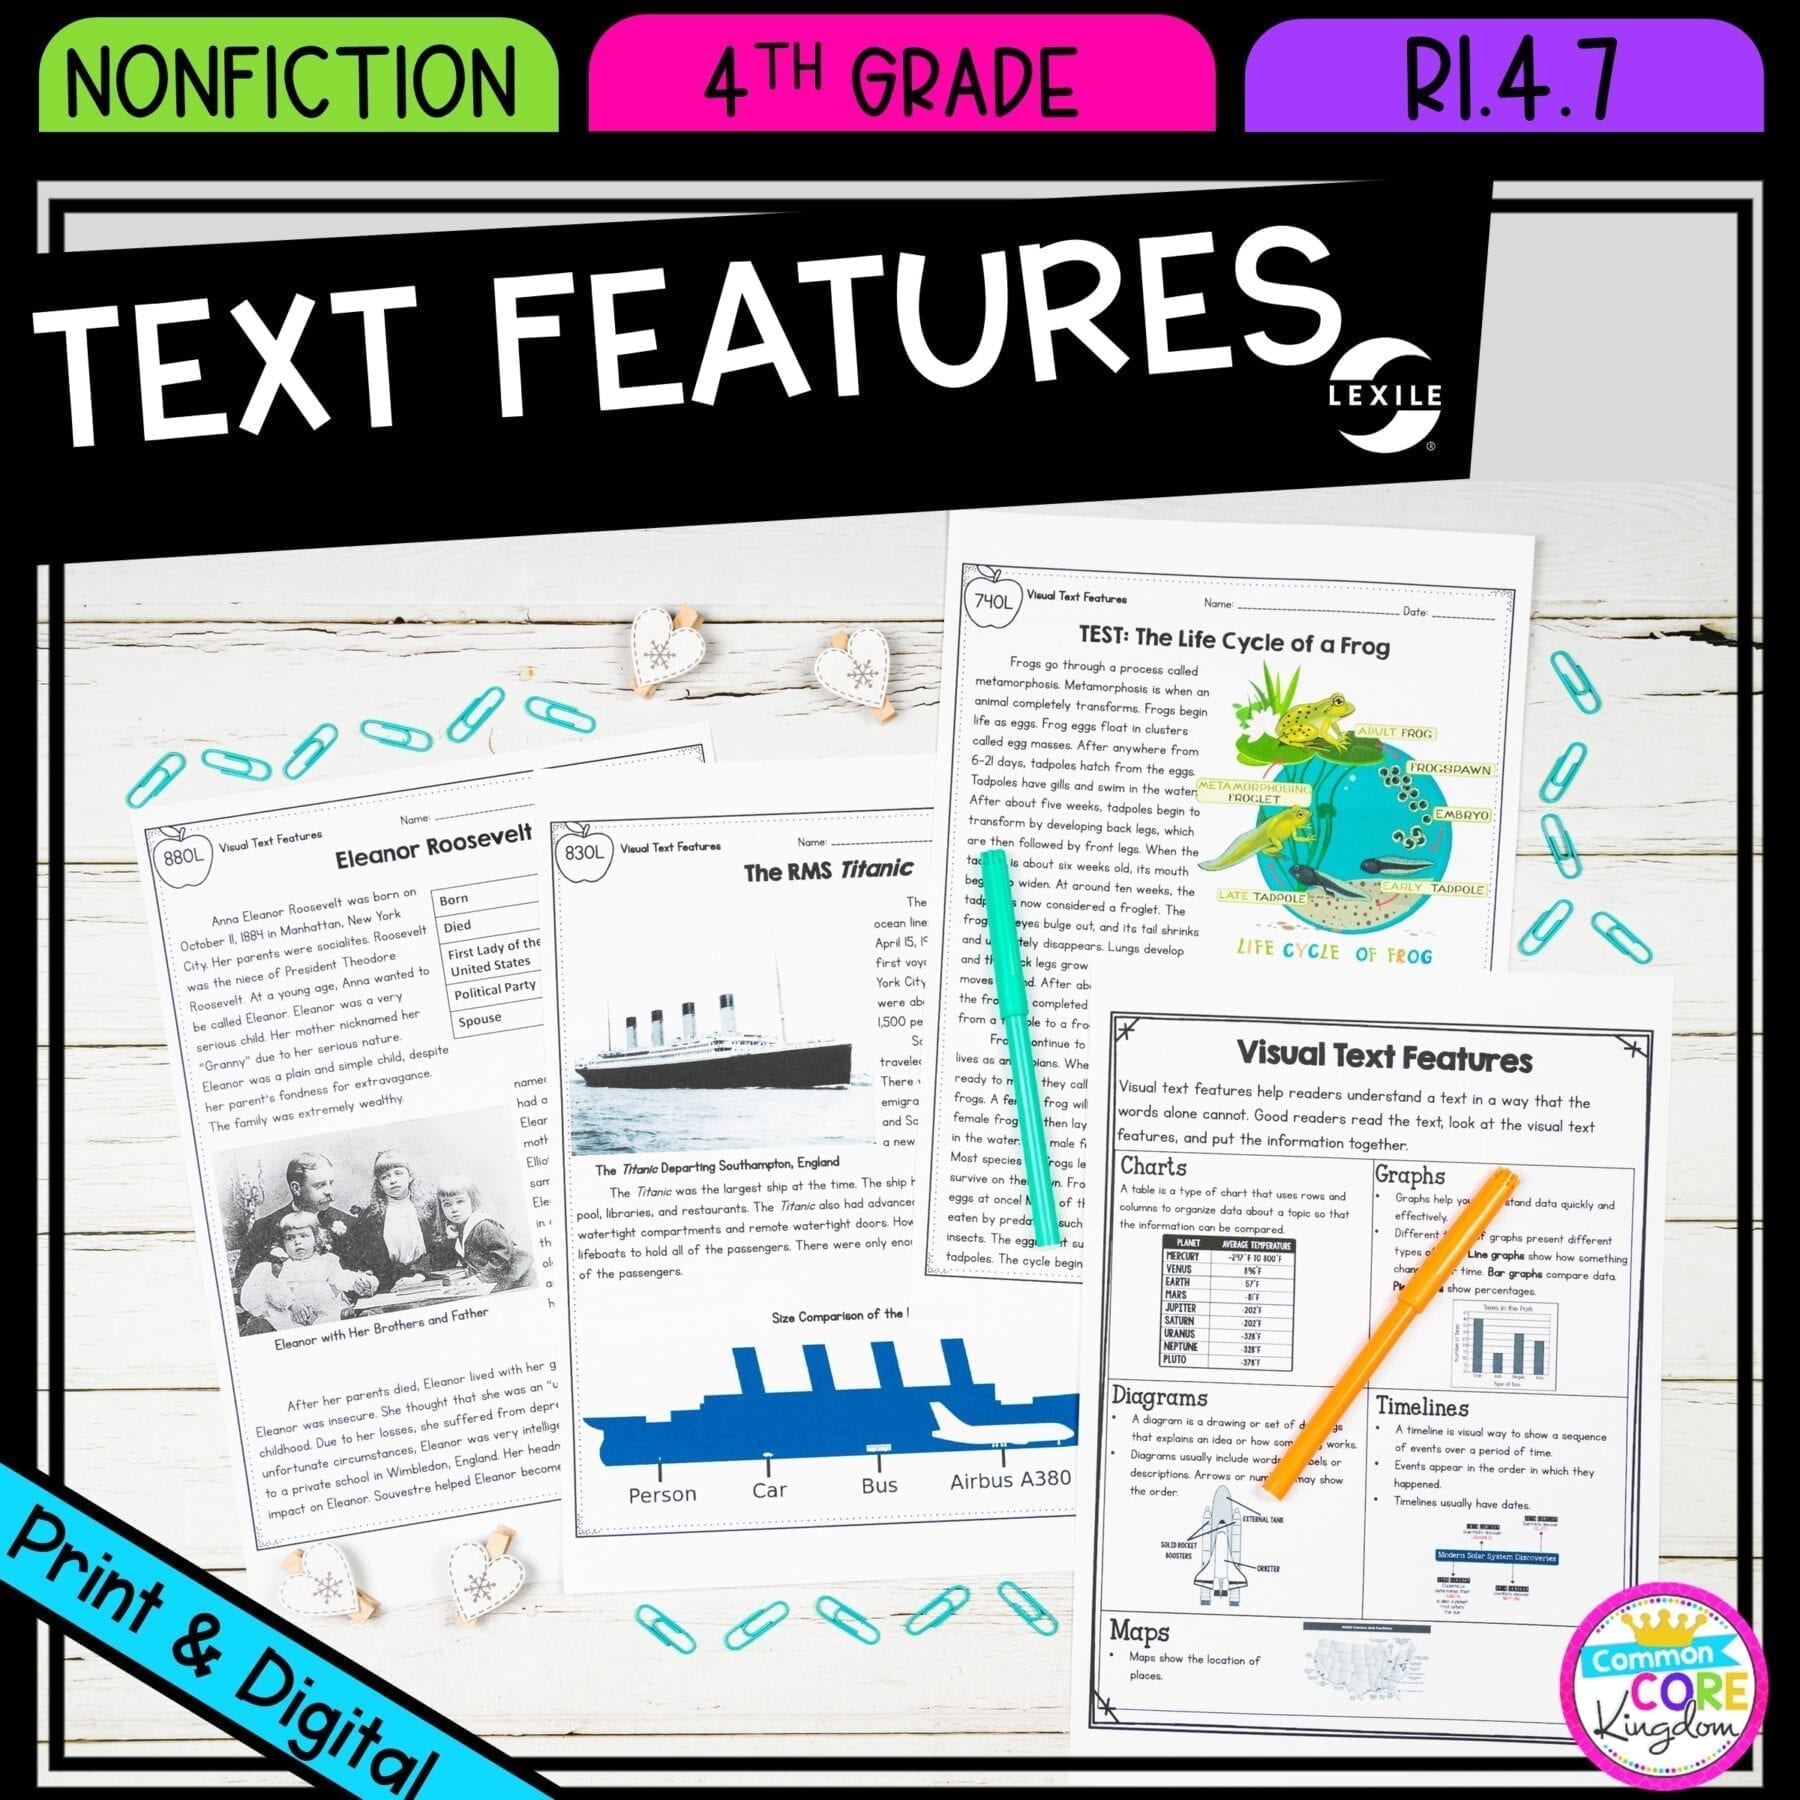 Nonfiction Text Features for 4th grade cover showing printable and digital worksheets